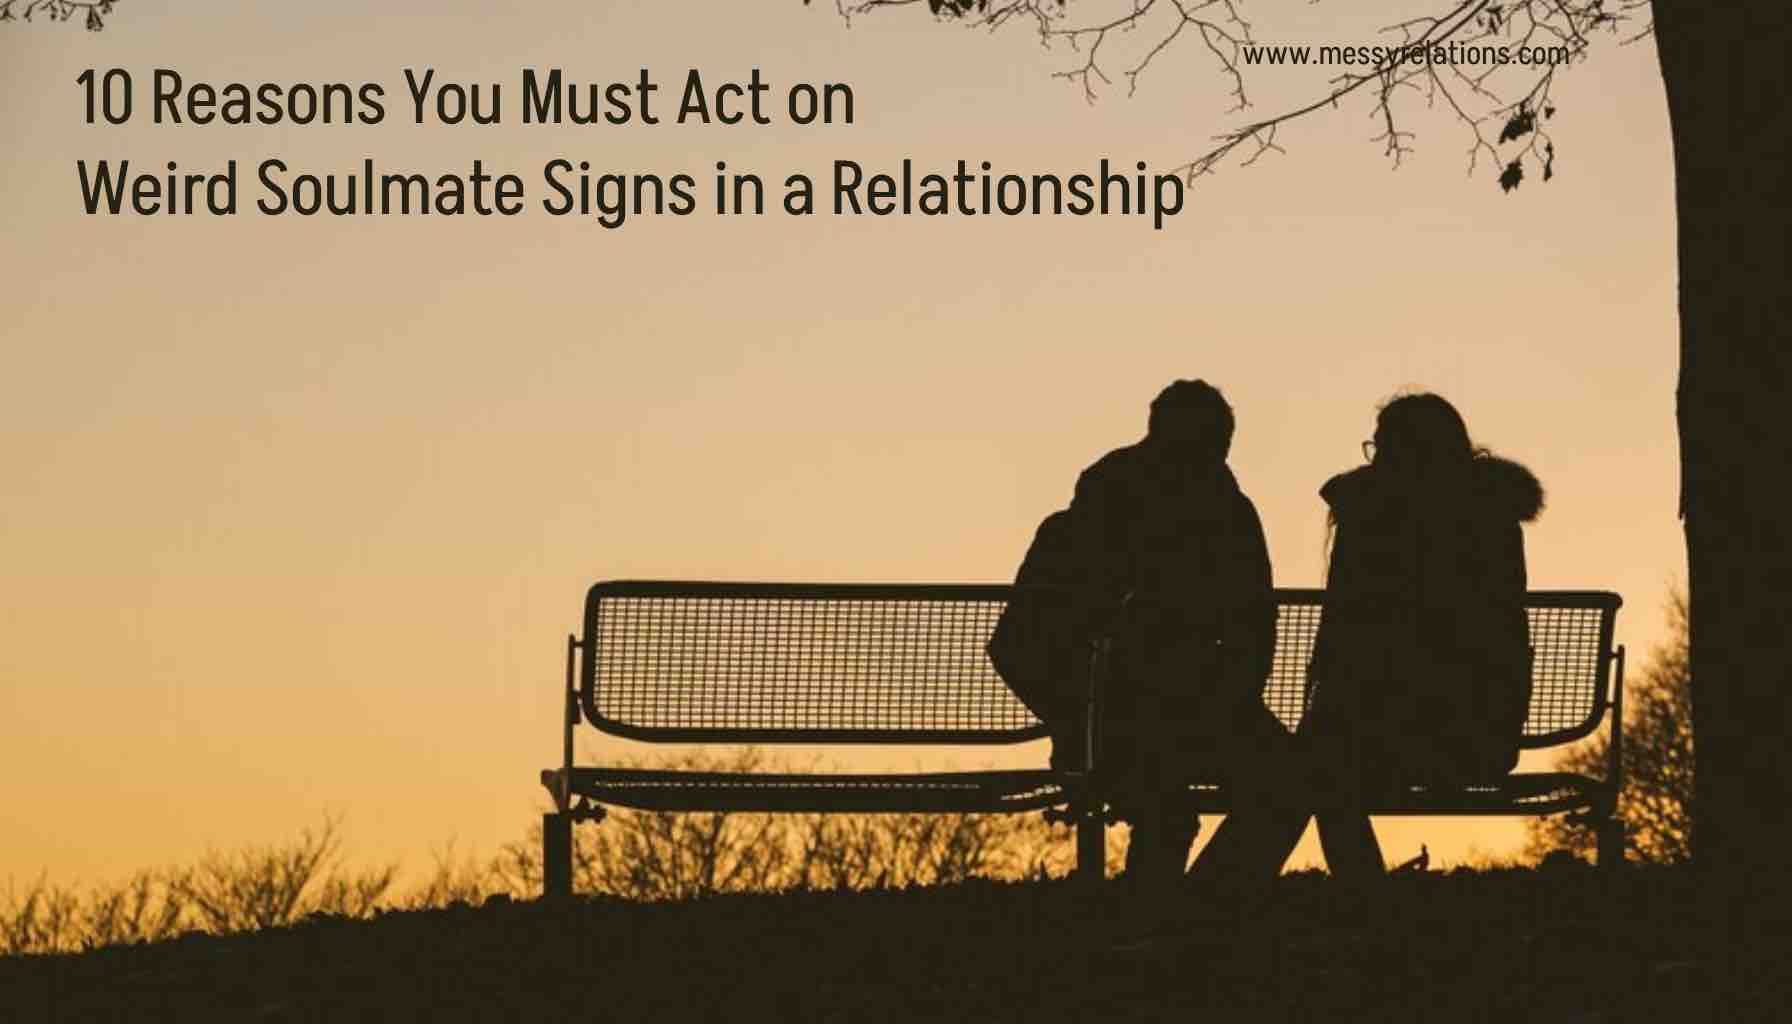 Weird Soulmate Signs in a Relationship